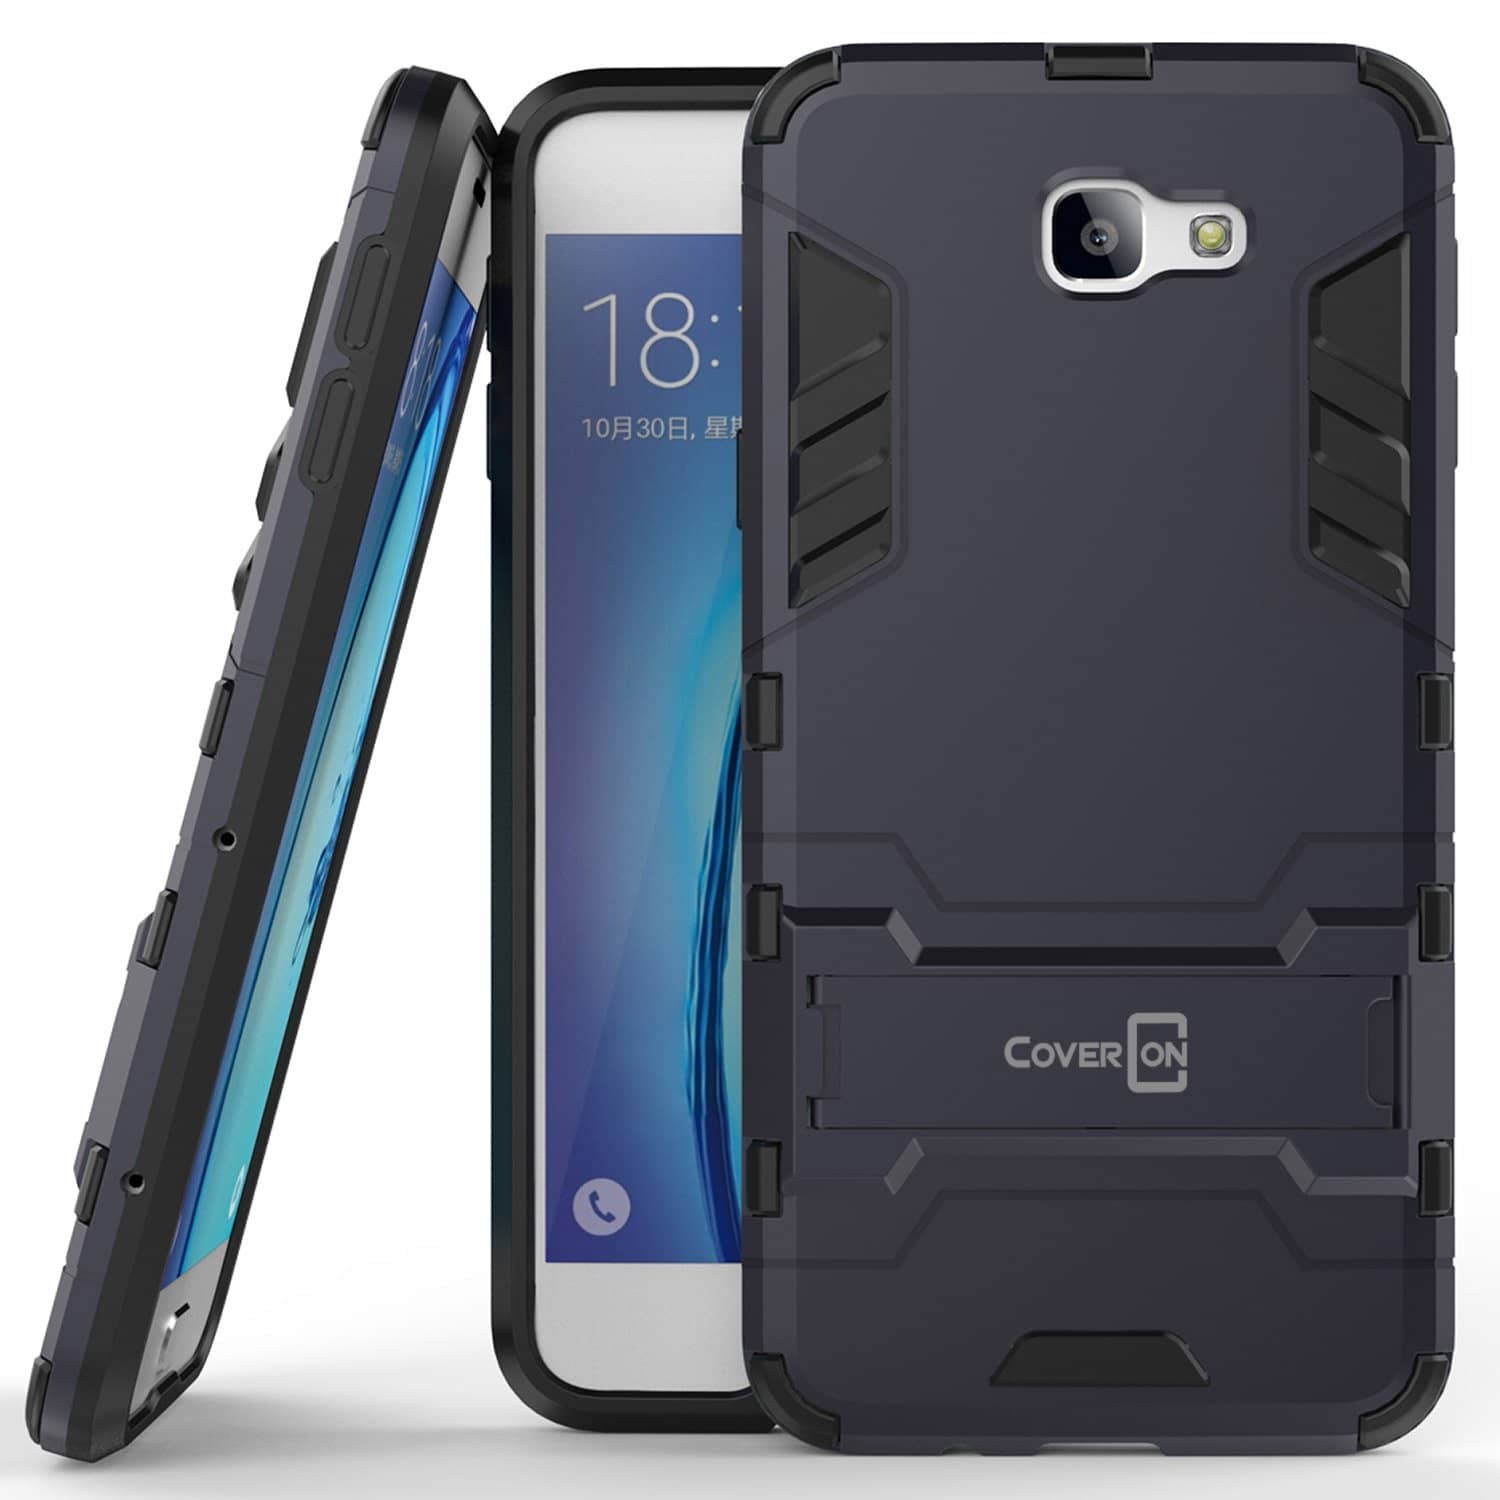 10 Best Cases for Samsung Galaxy J5 Prime 7